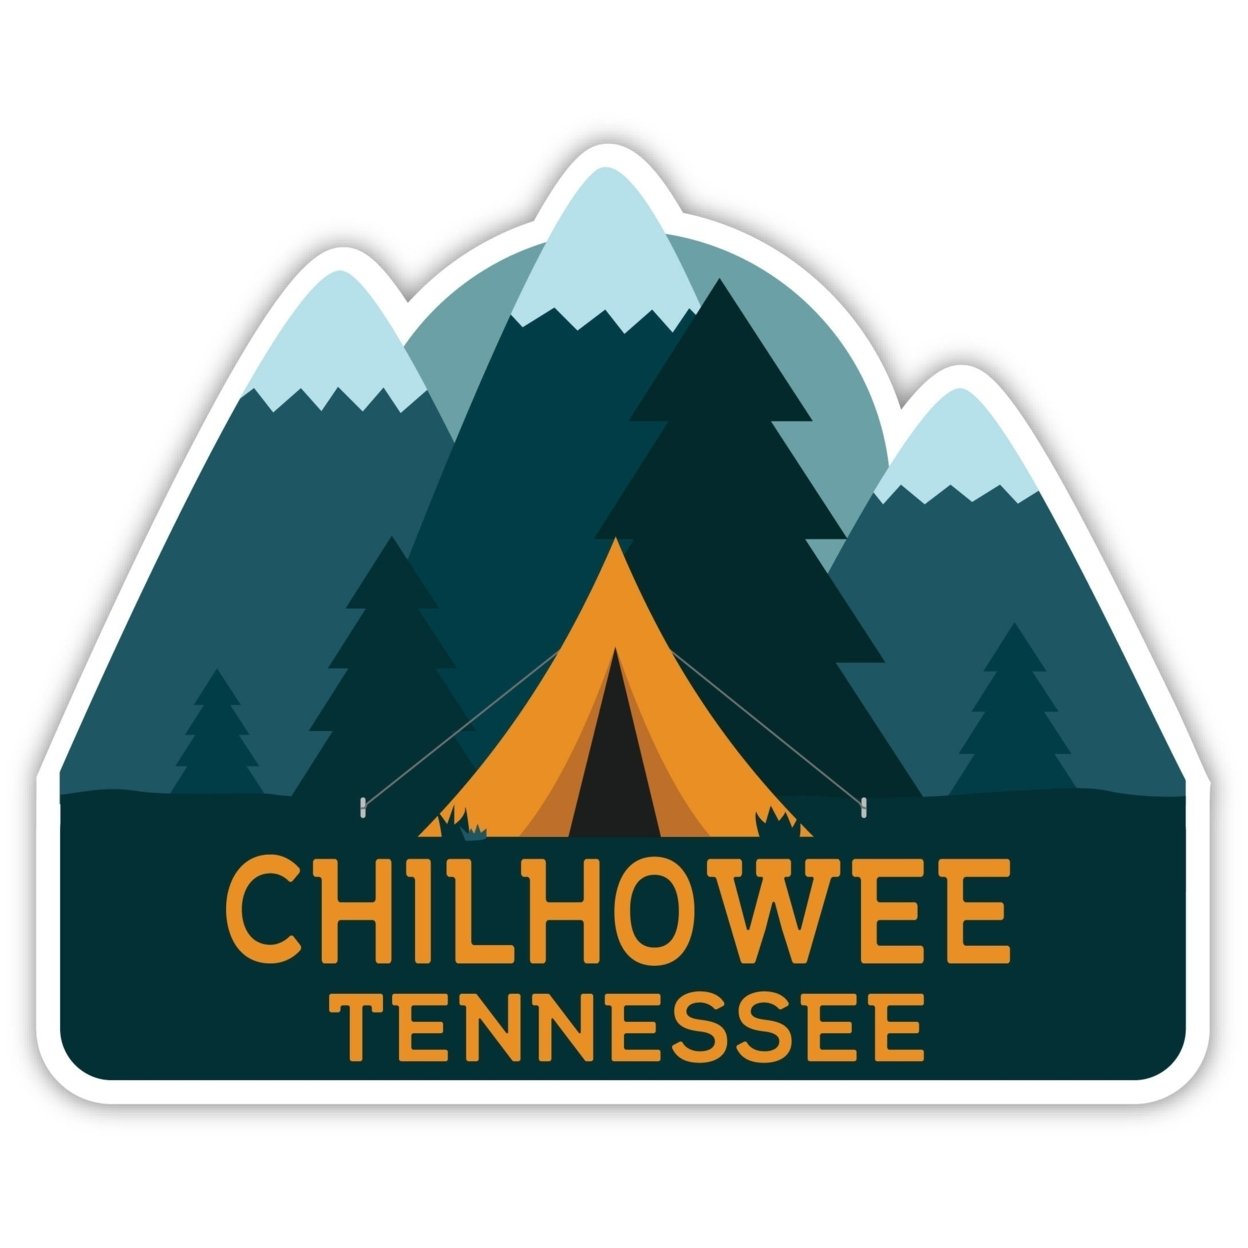 Chilhowee Tennessee Souvenir Decorative Stickers (Choose Theme And Size) - 4-Pack, 4-Inch, Tent